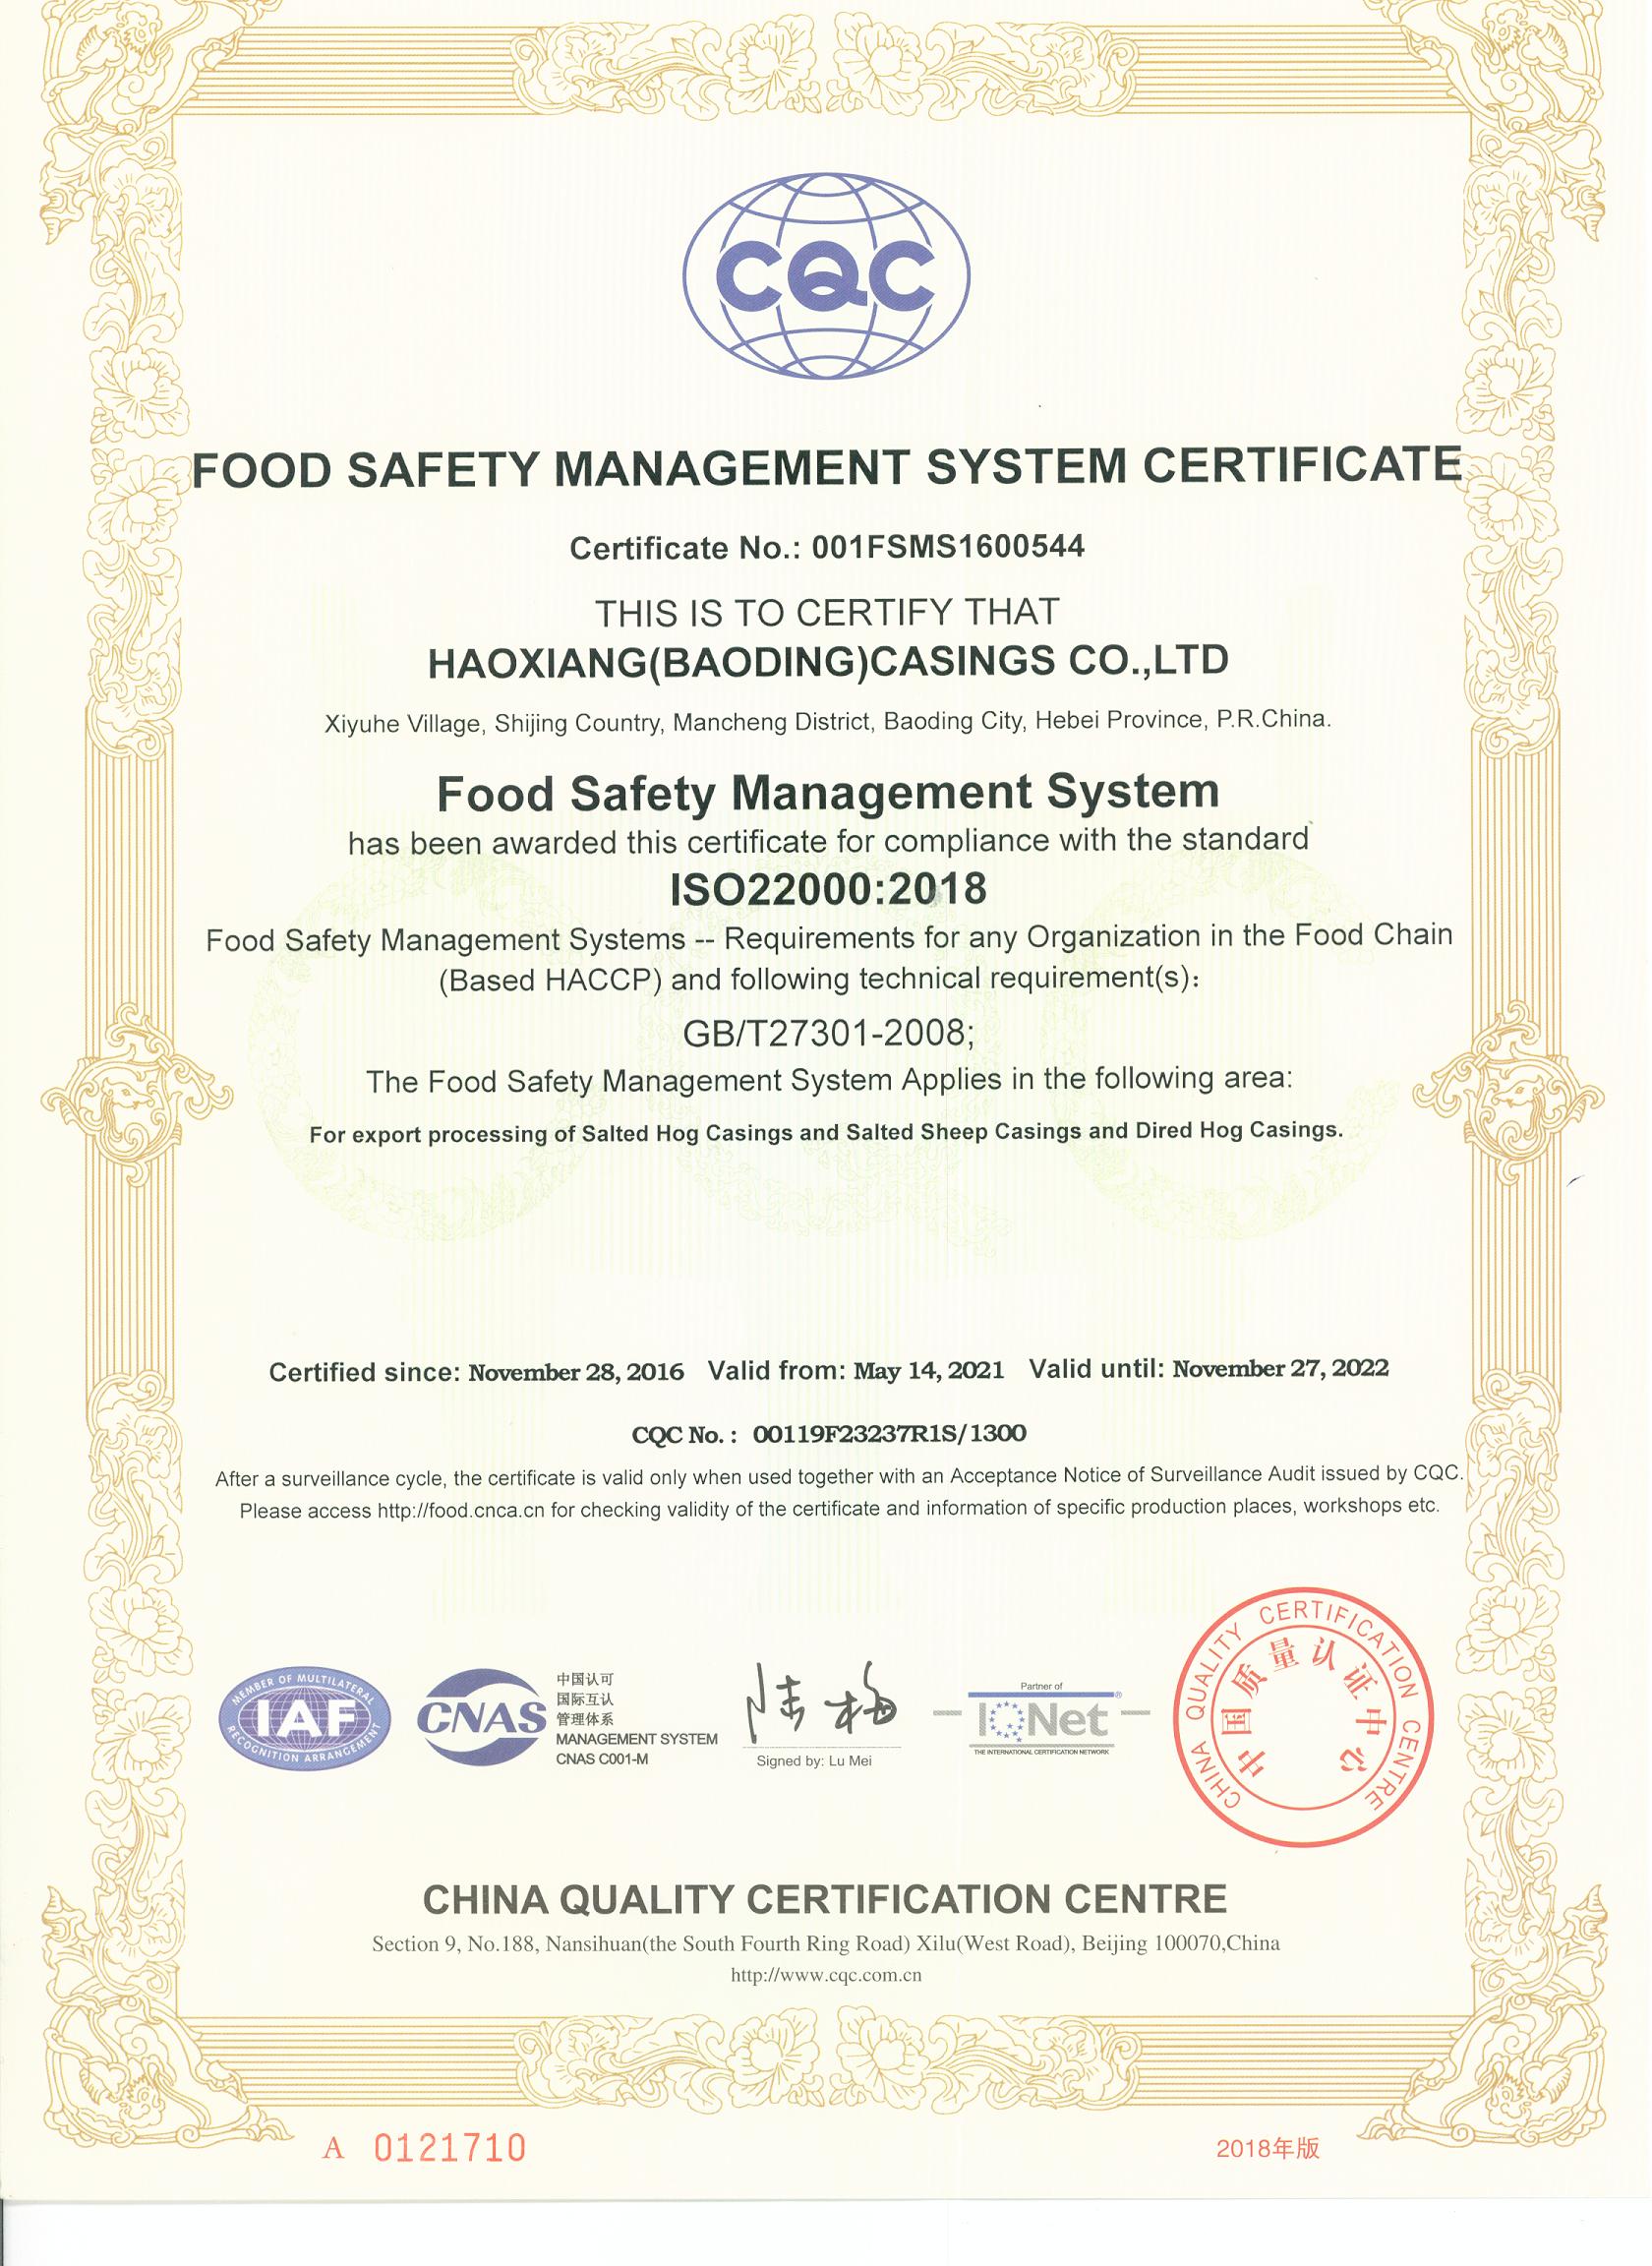 Food safety management system certificate